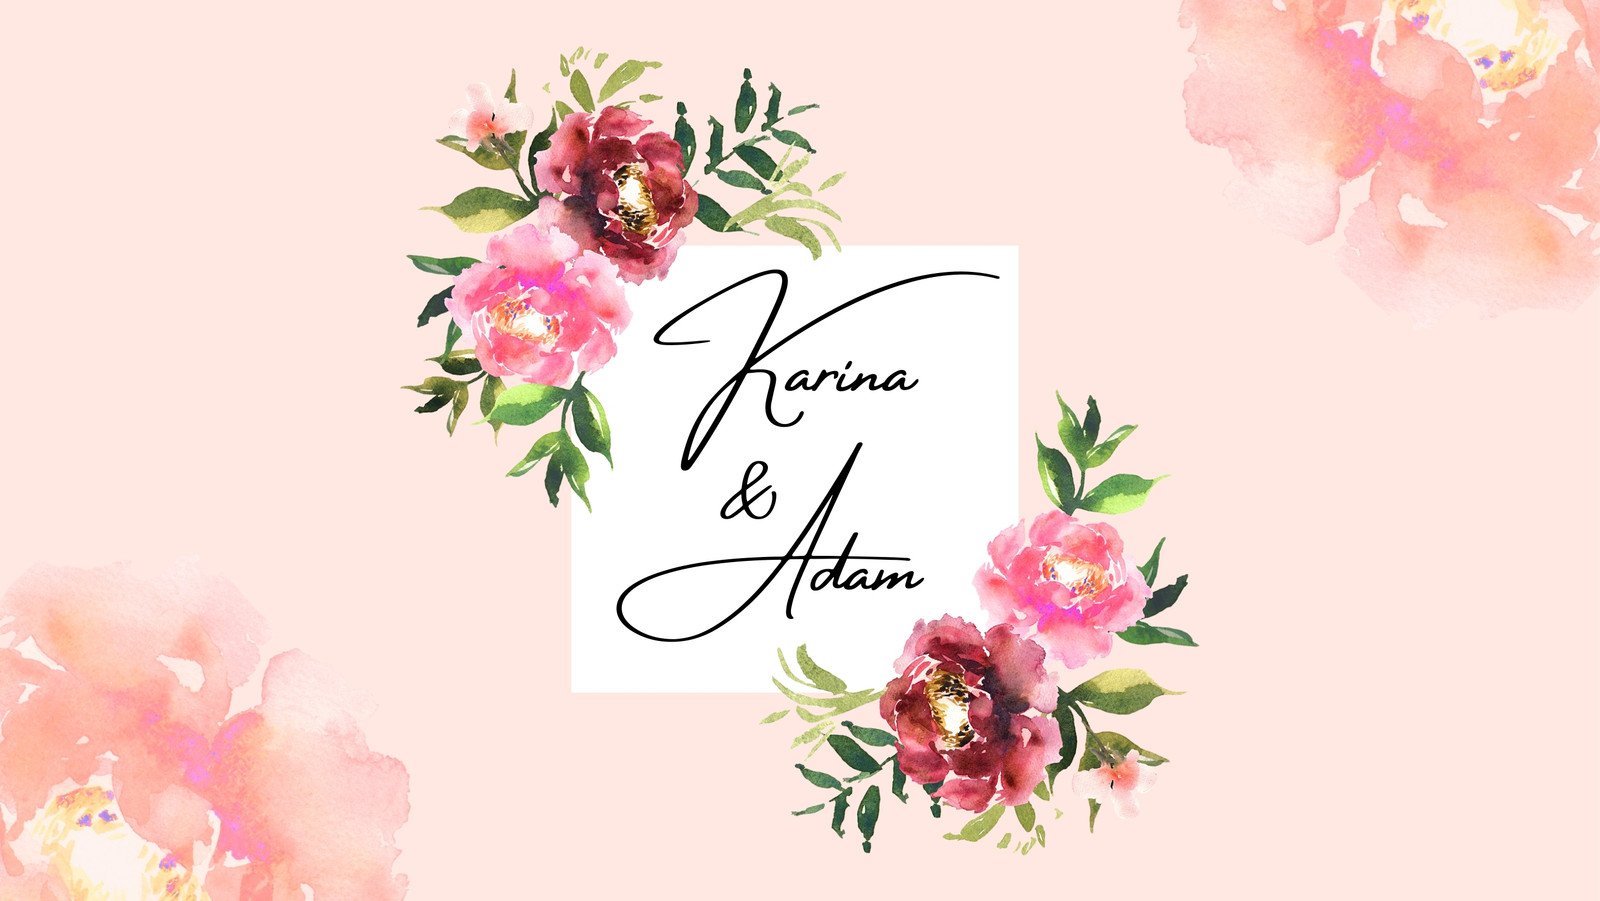 Customize 1,054+ Floral Facebook Cover Templates Online - Canva